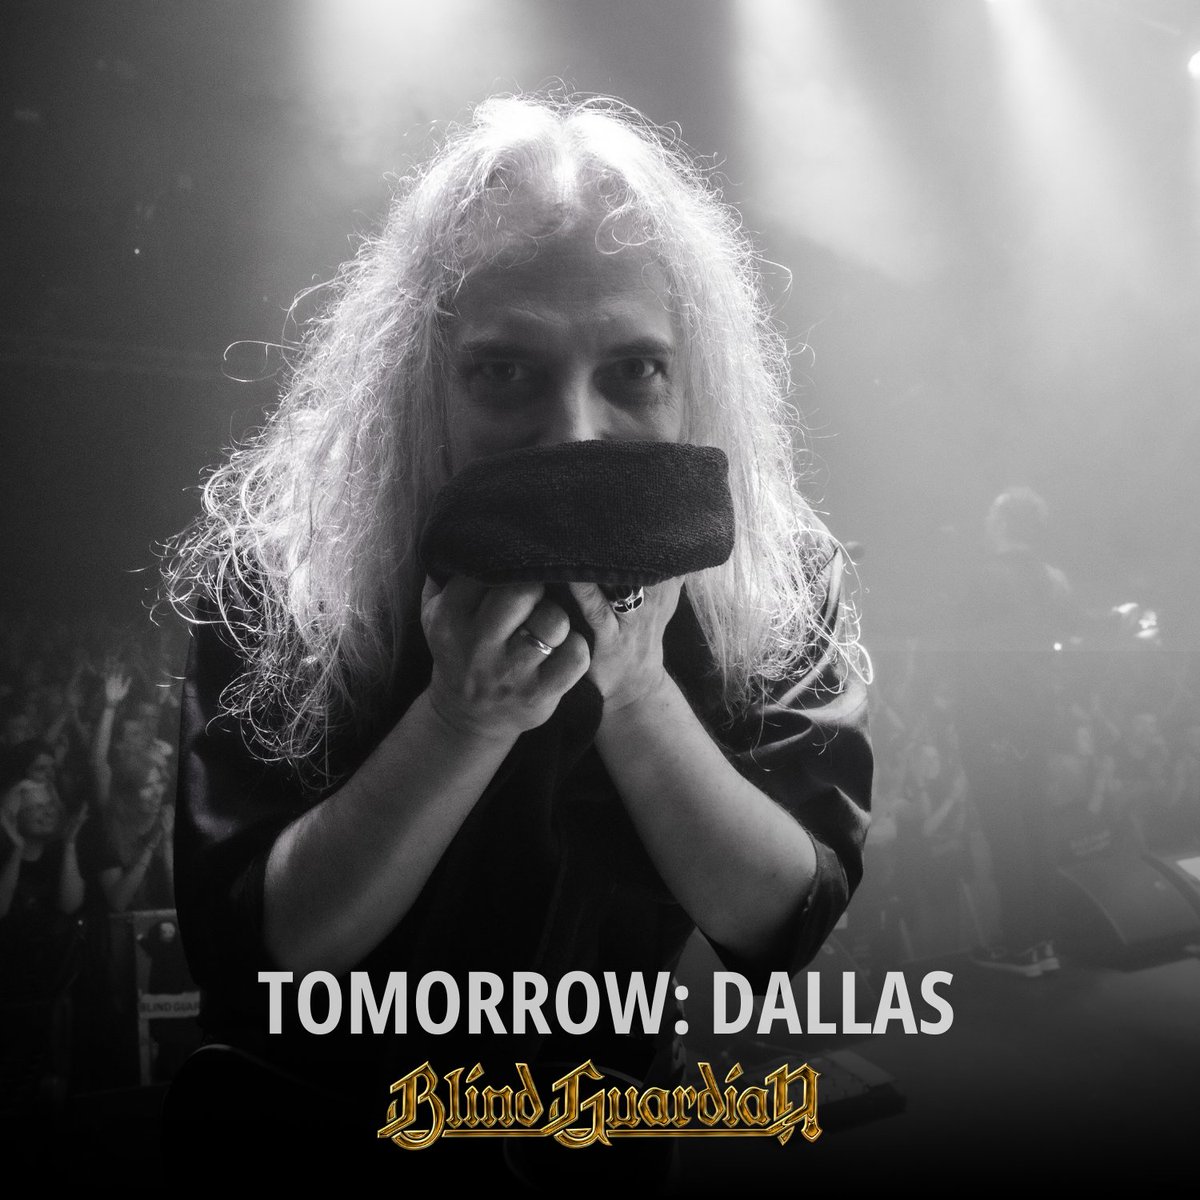 Two shows in the 'Lone Star State' – Texas, we are coming for you! First, we'll rock The Factory in Deep Ellum, in Dallas. Are you with us, bards? Don't miss the show! ➡️ blind-guardian.com/tour #blindguardian #blindguardianusa #blindguardianlive #thegodmachinetour